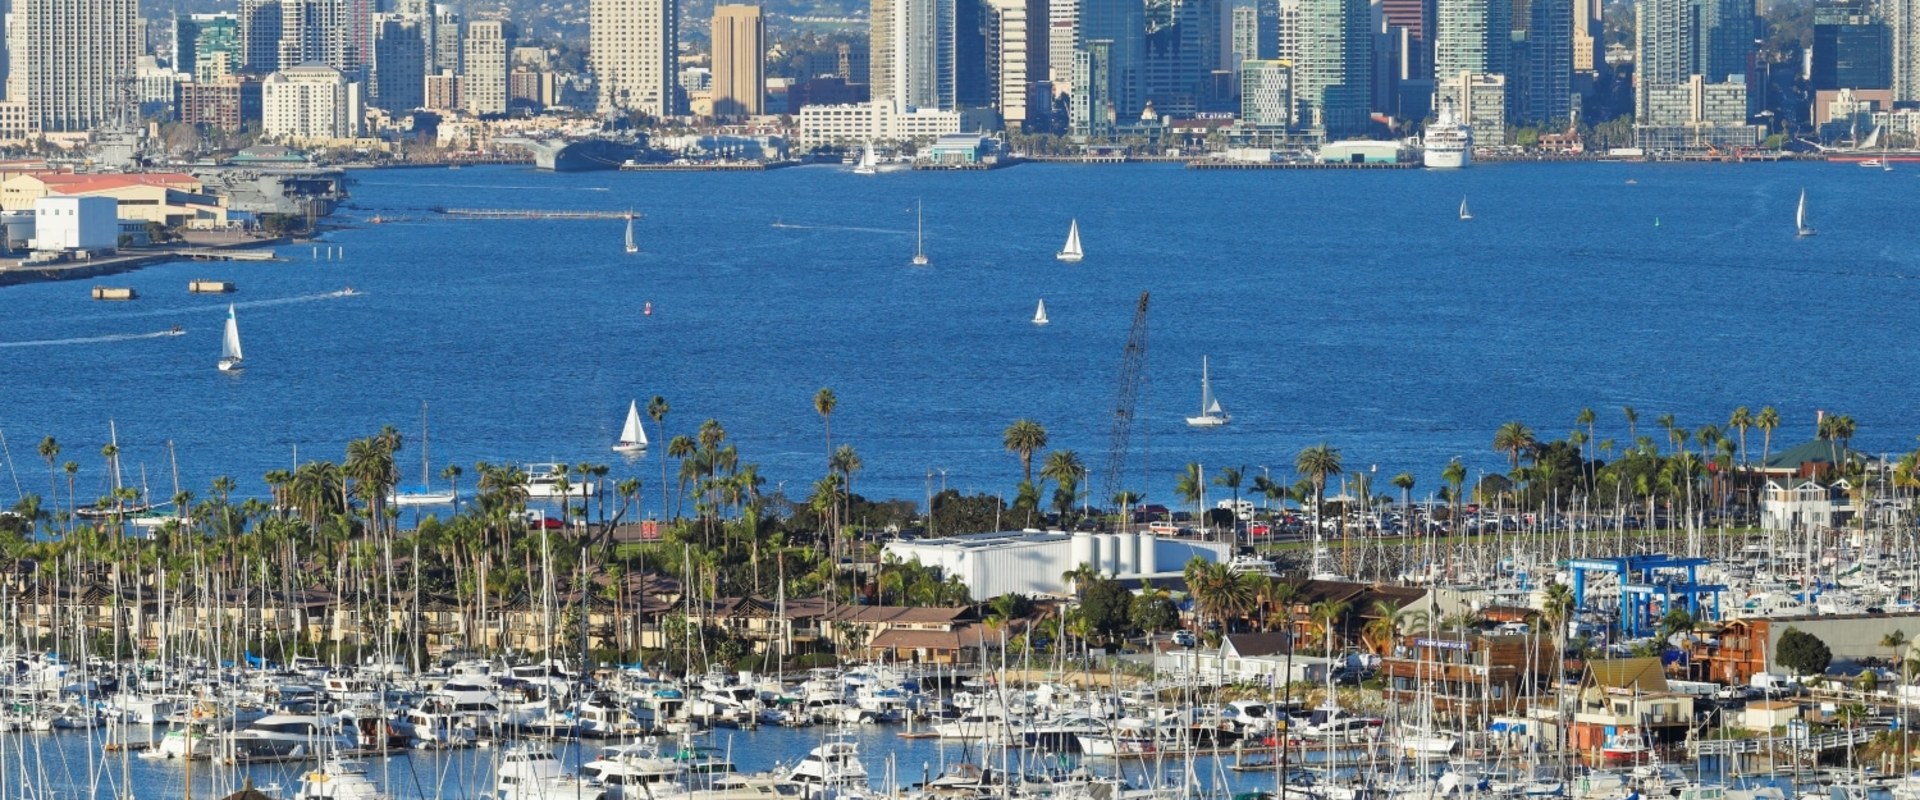 Why do people love san diego so much?